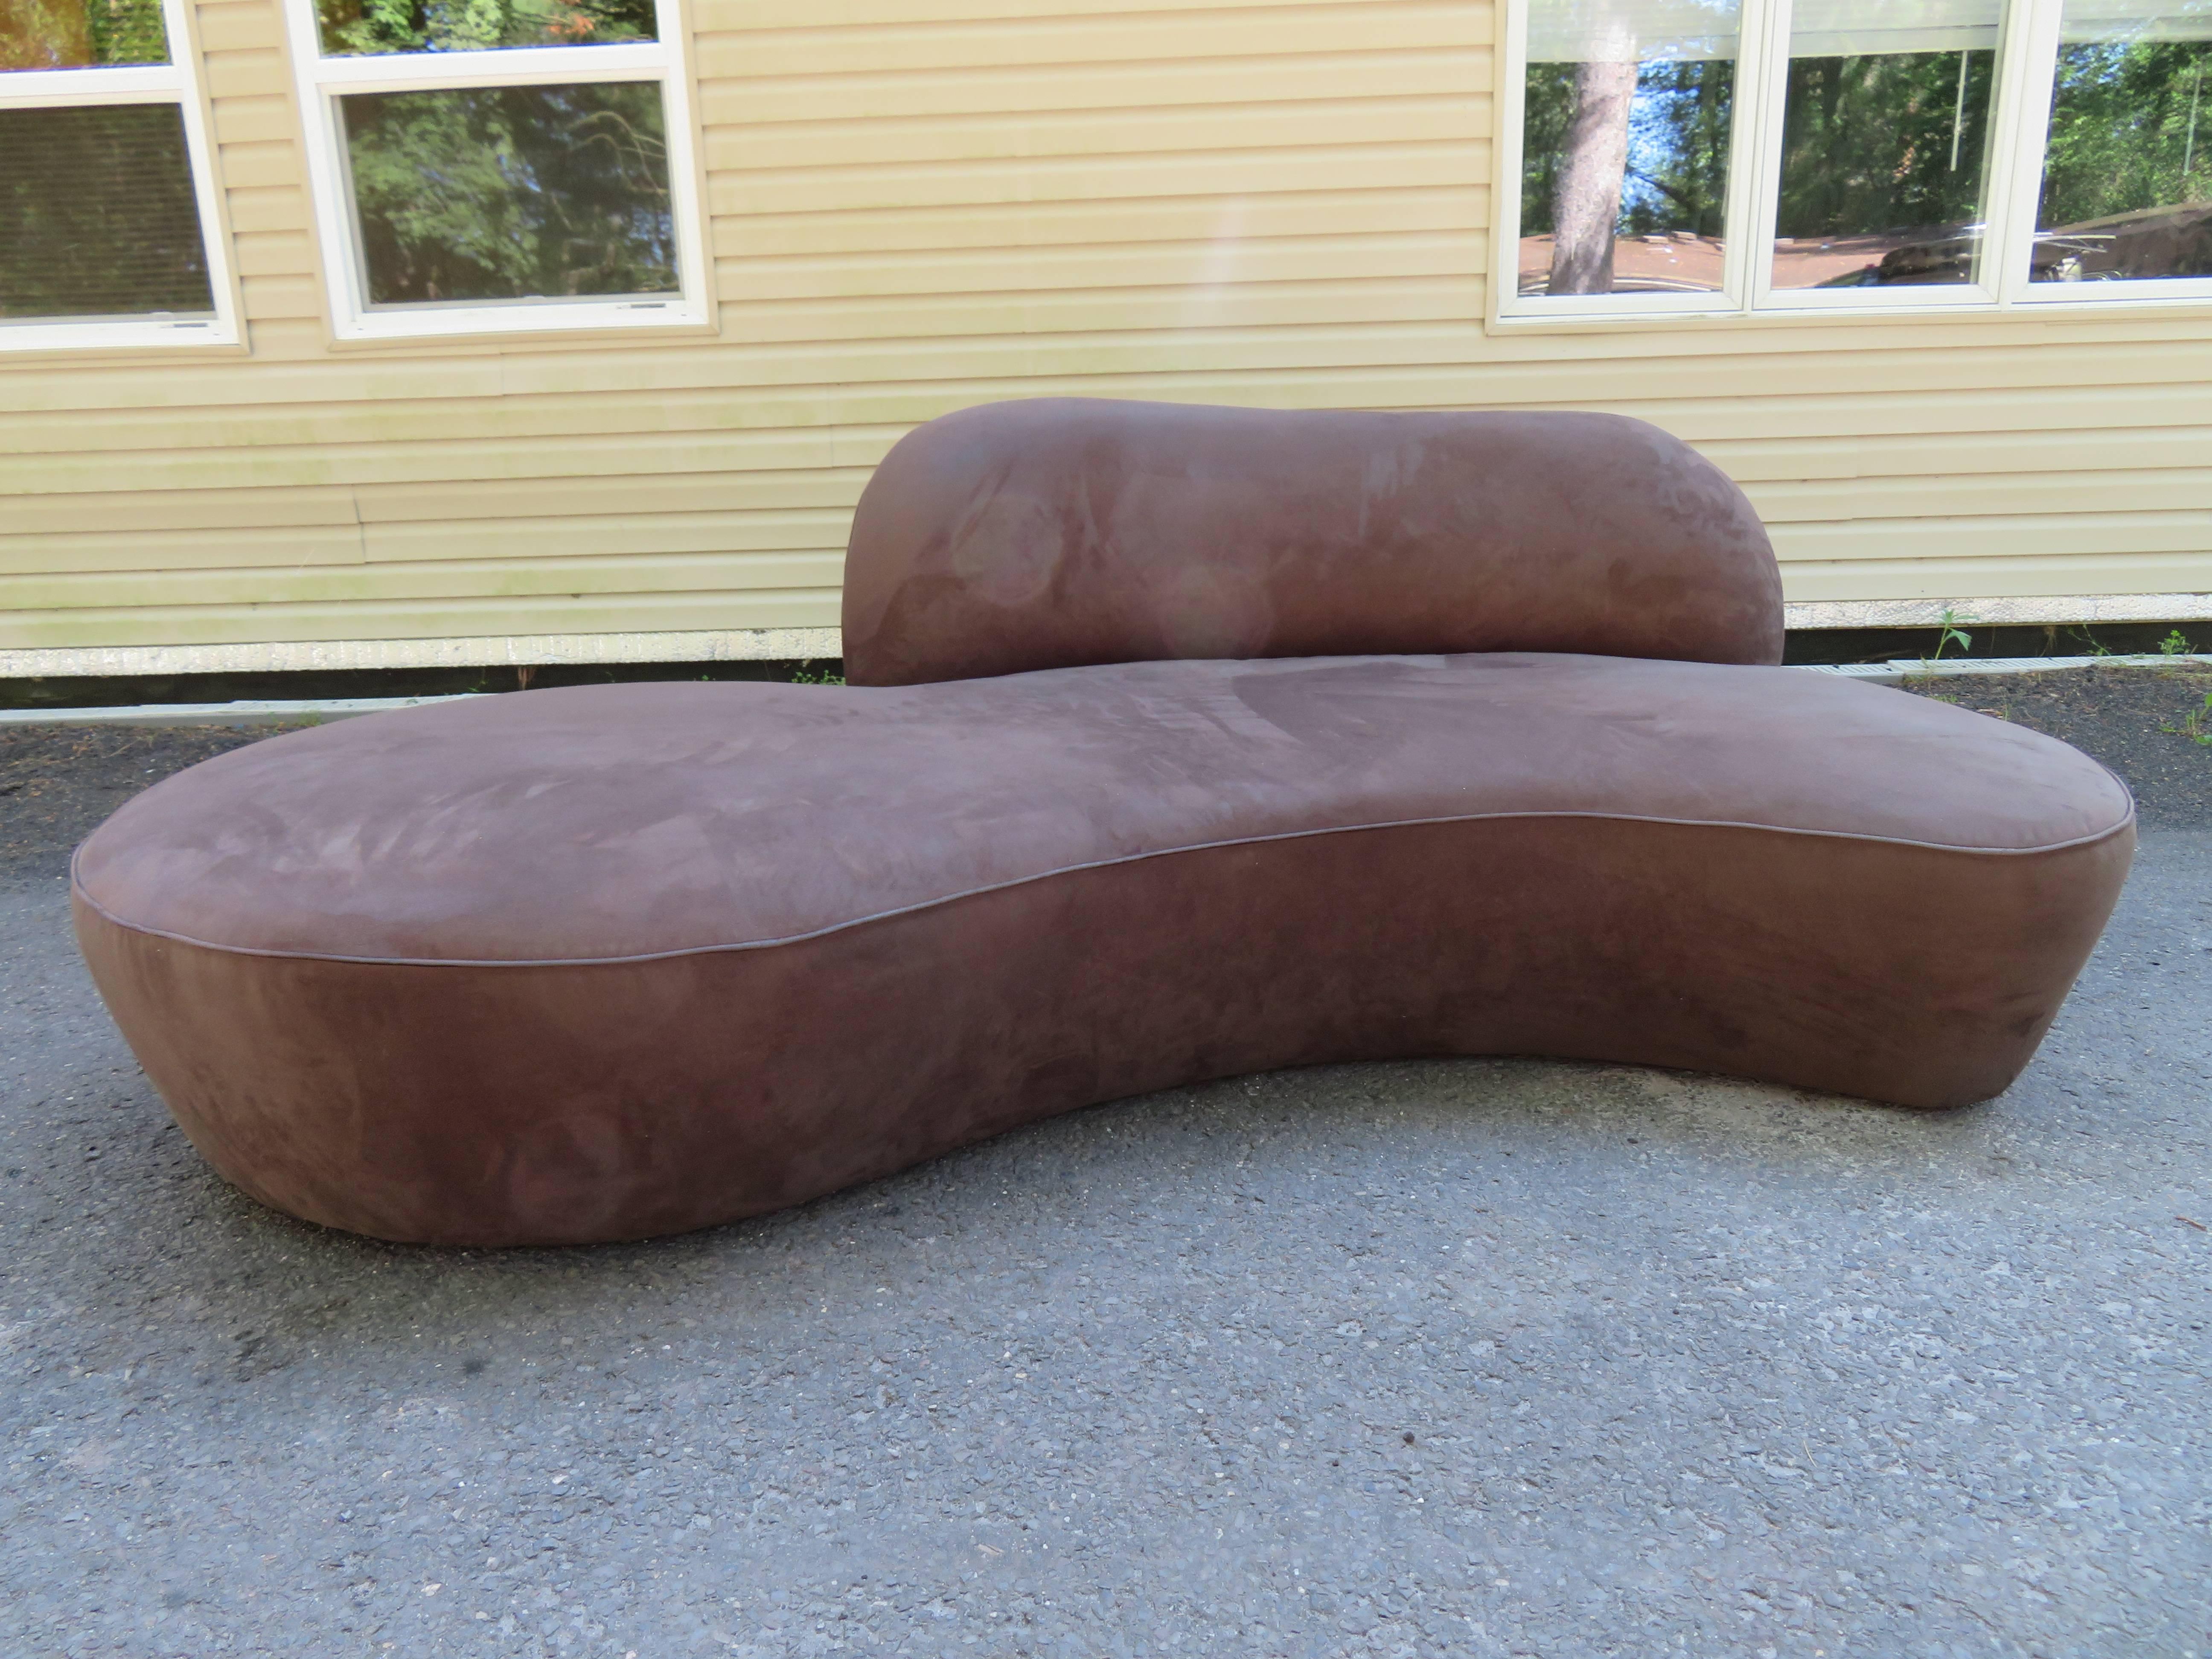 Stunning Vladimir Kagan curved serpentine cloud sofa upholstered in a lovely chocolate brown ultra suede. Vladimir Kagan for Room and Board.